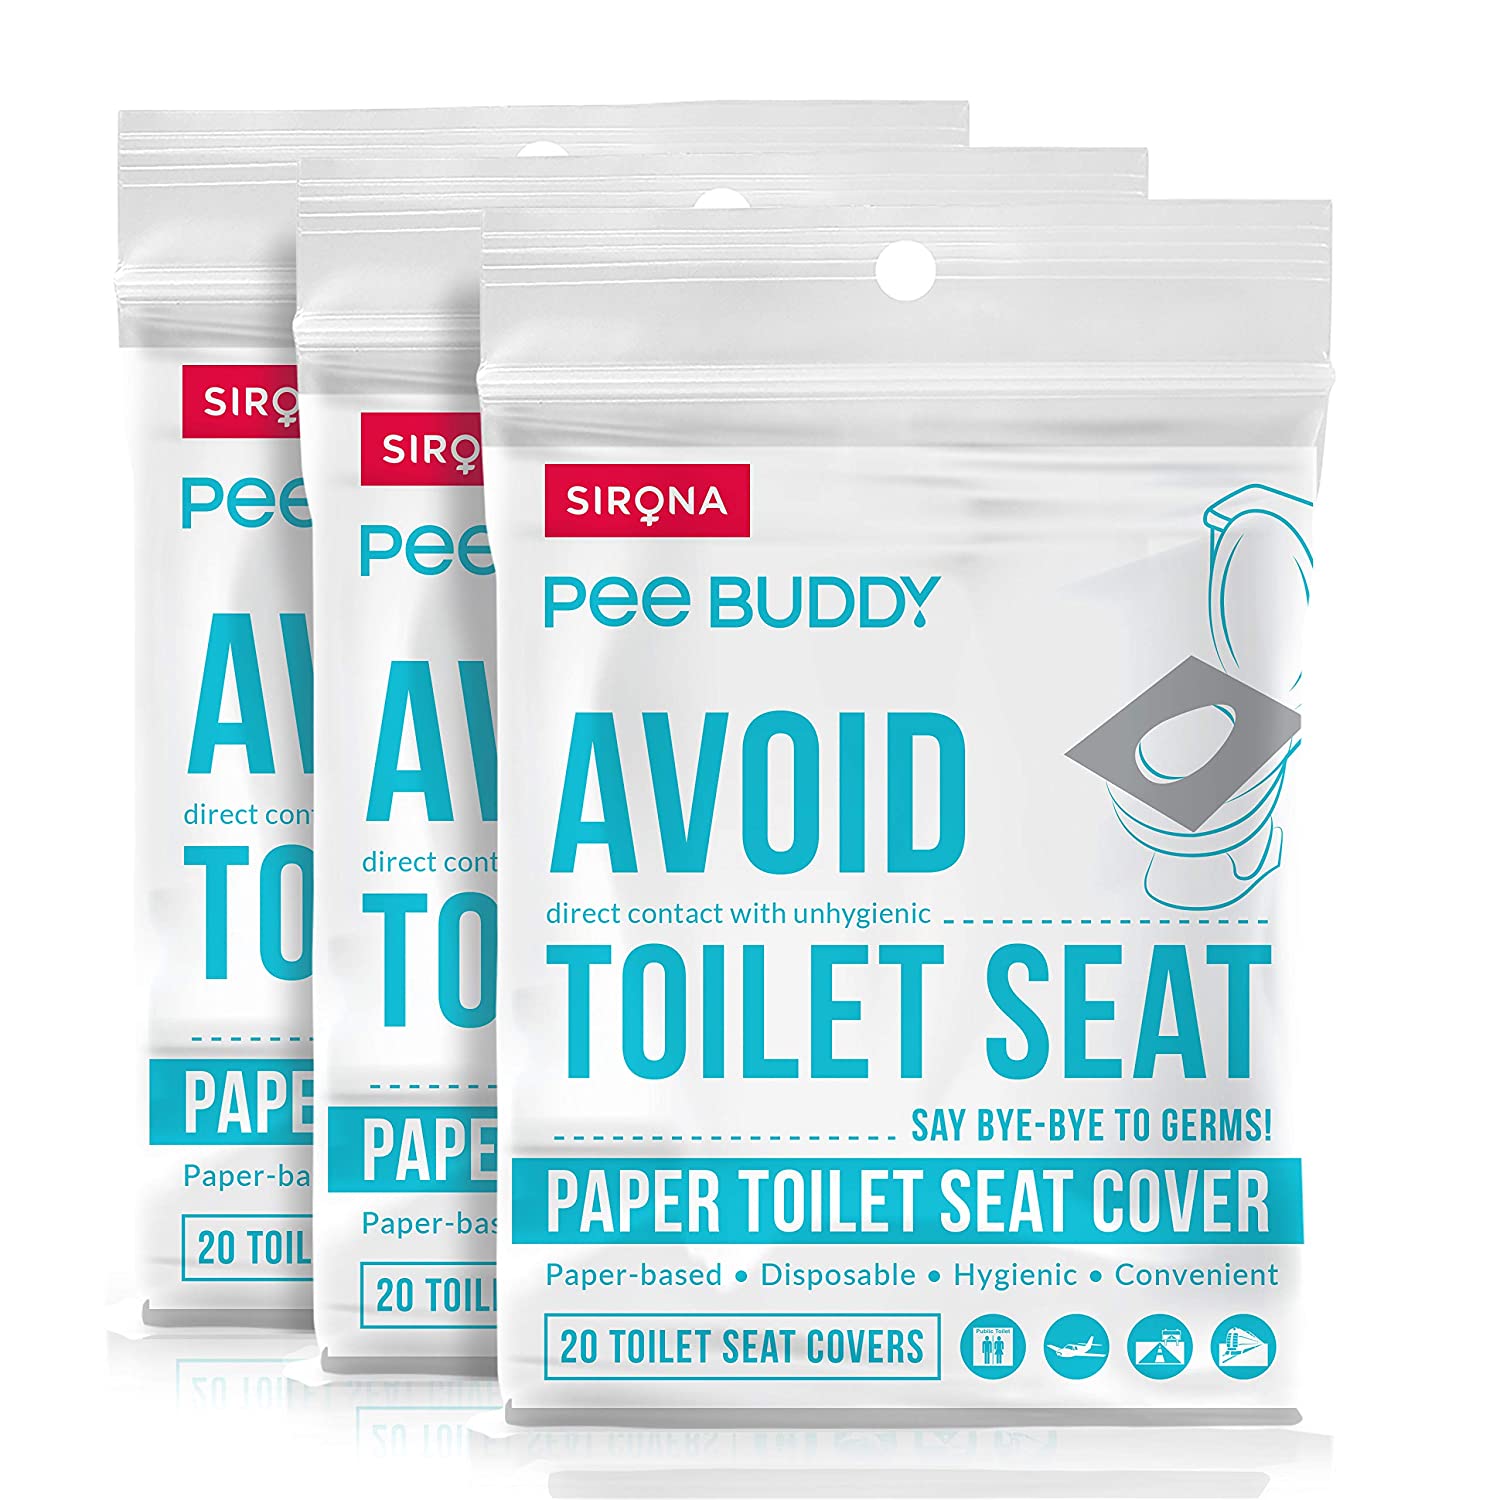 Peebuddy Disposable Toilet Seat Cover To Avoid Direct Contact With Unhygienic Toilet Seats - 20 Seat